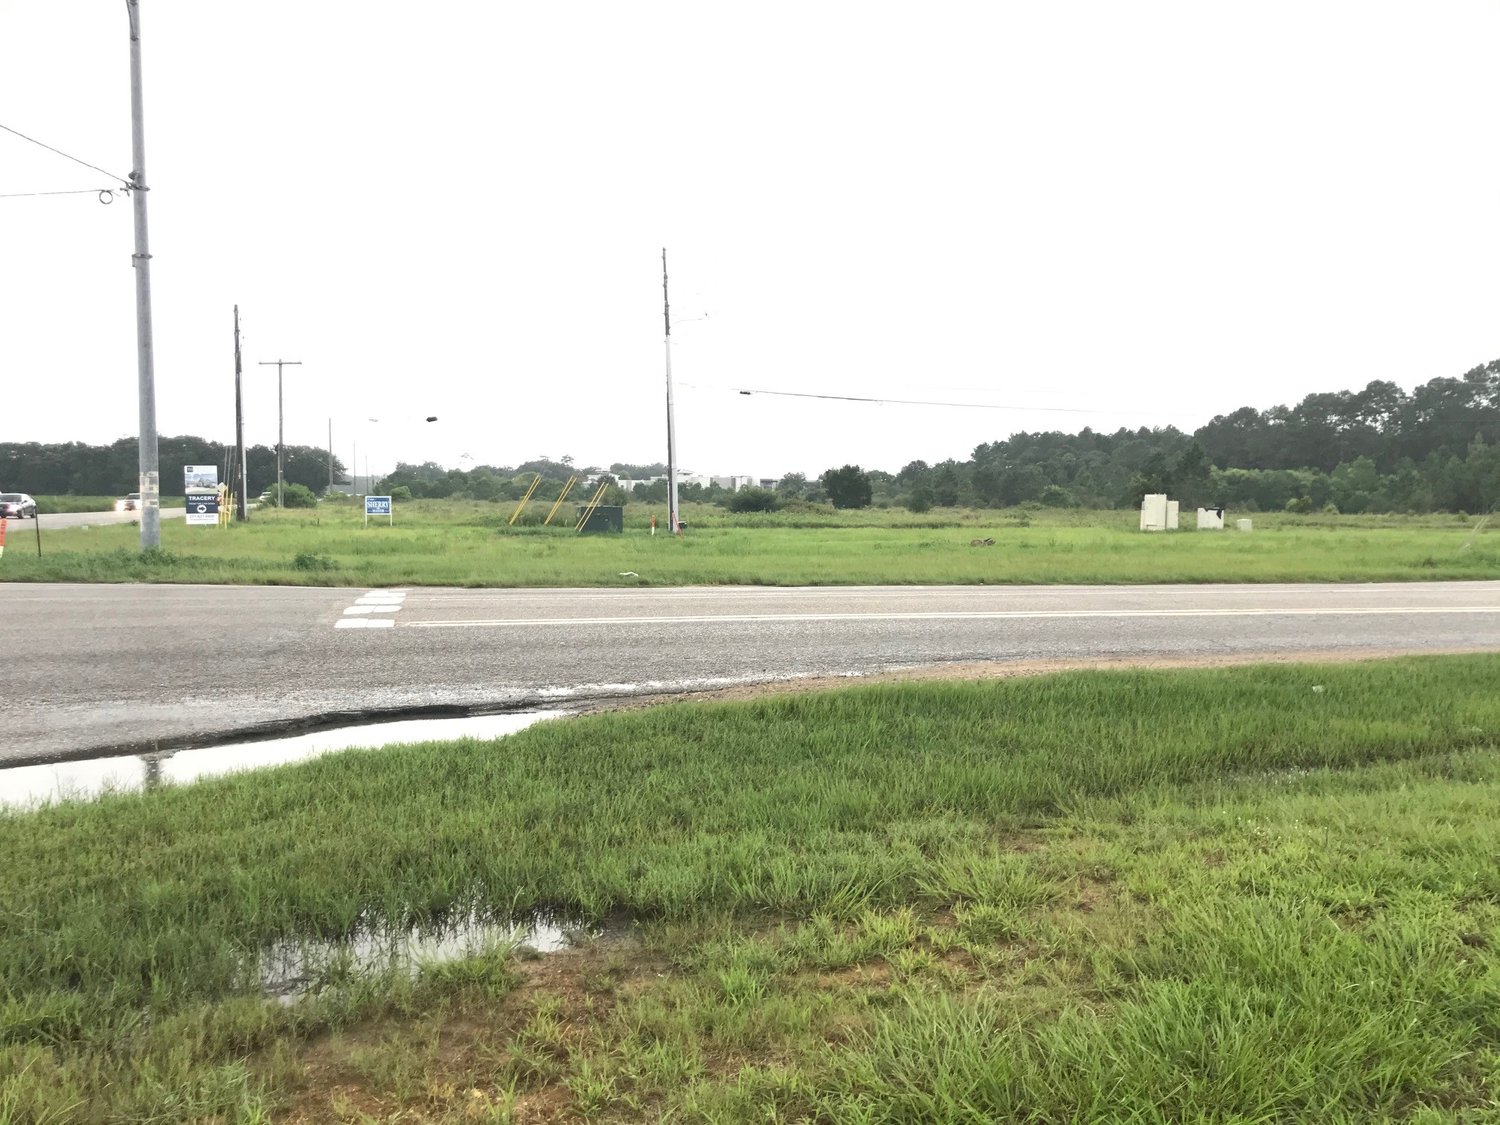 USA Health had planned to build a surgery center on the southeast corner of Alabama 181 and Alabama 104. A state judge has recommended that the certification needed for that project be denied.